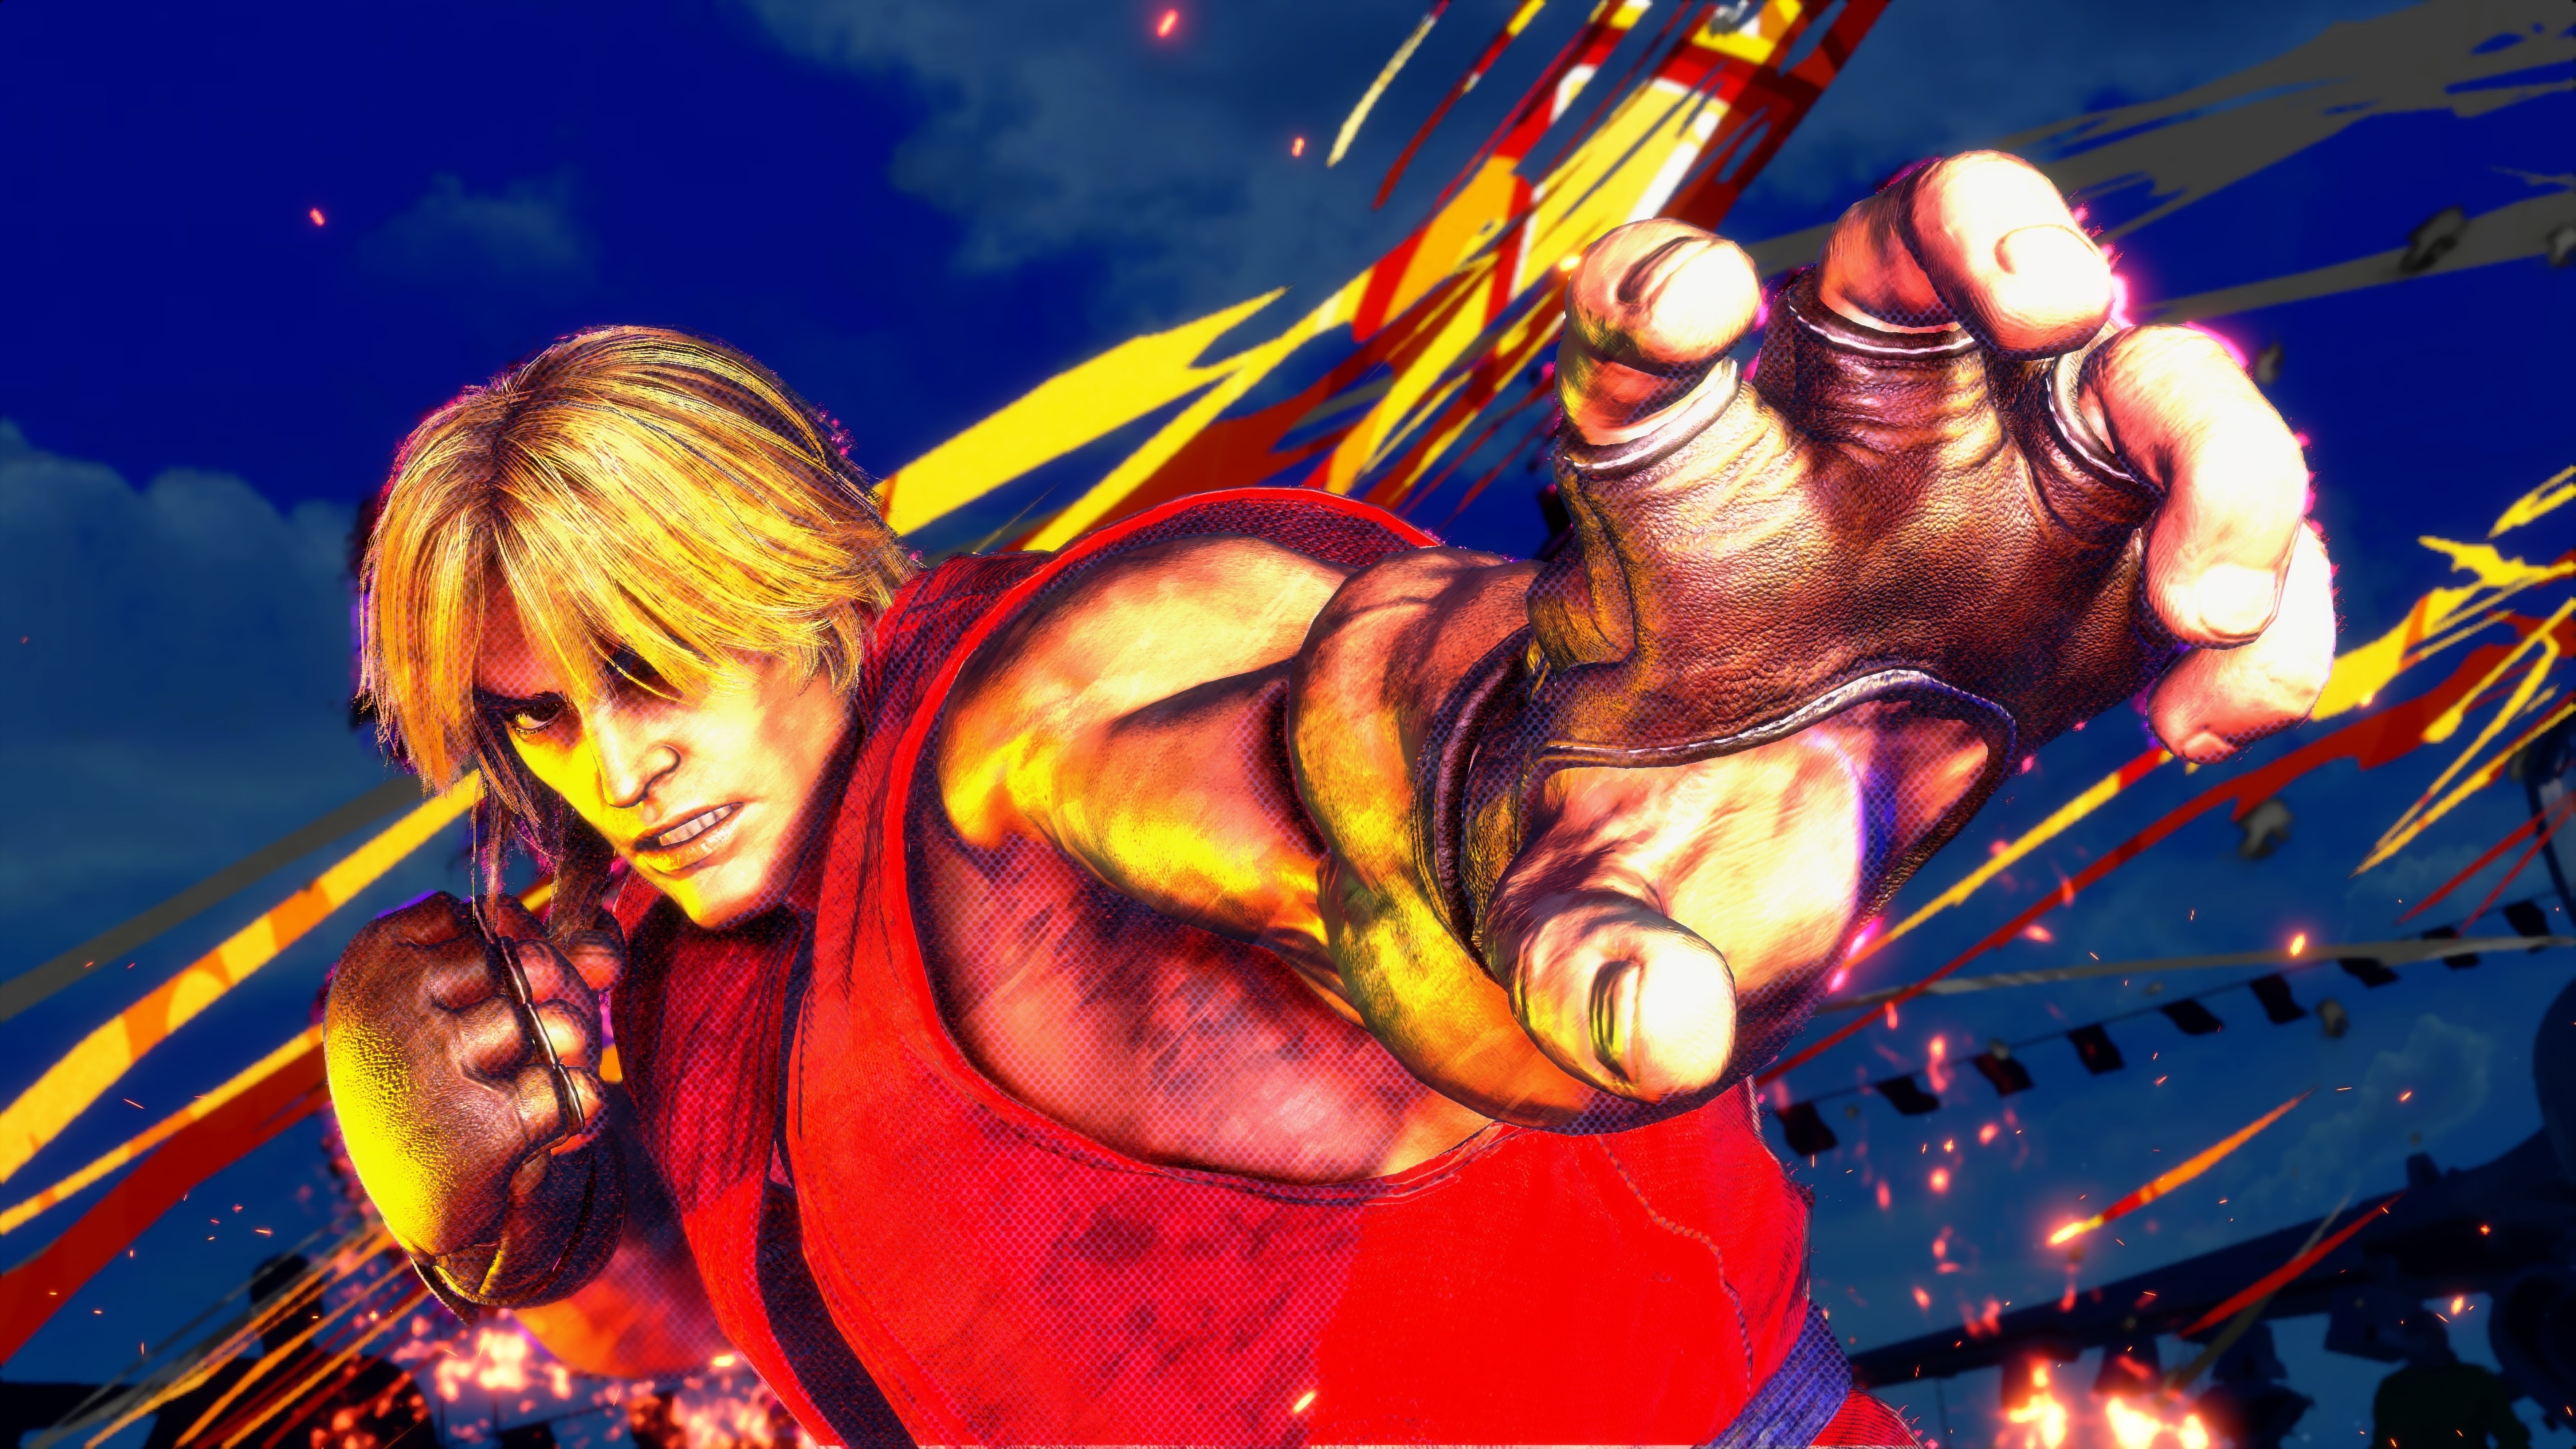 Download Street Fighter wallpapers for mobile phone free Street Fighter  HD pictures